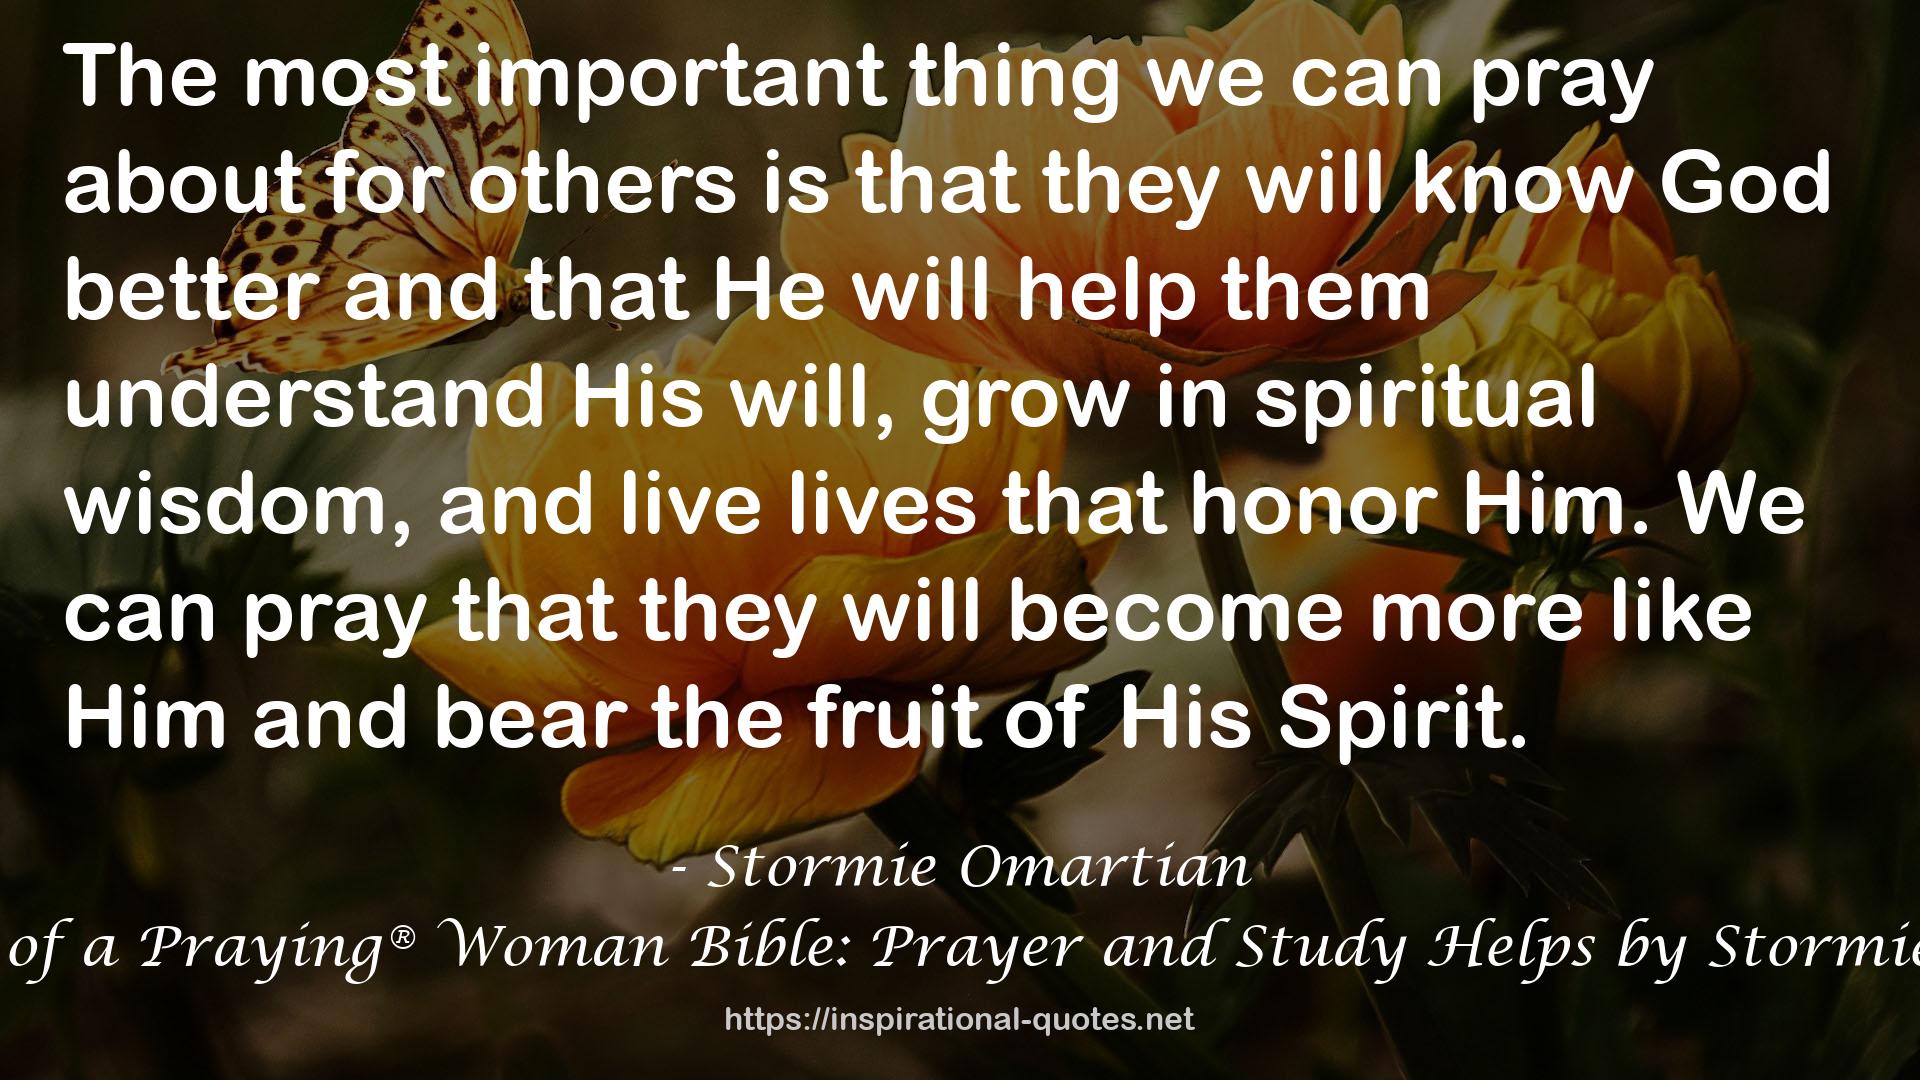 Stormie Omartian QUOTES